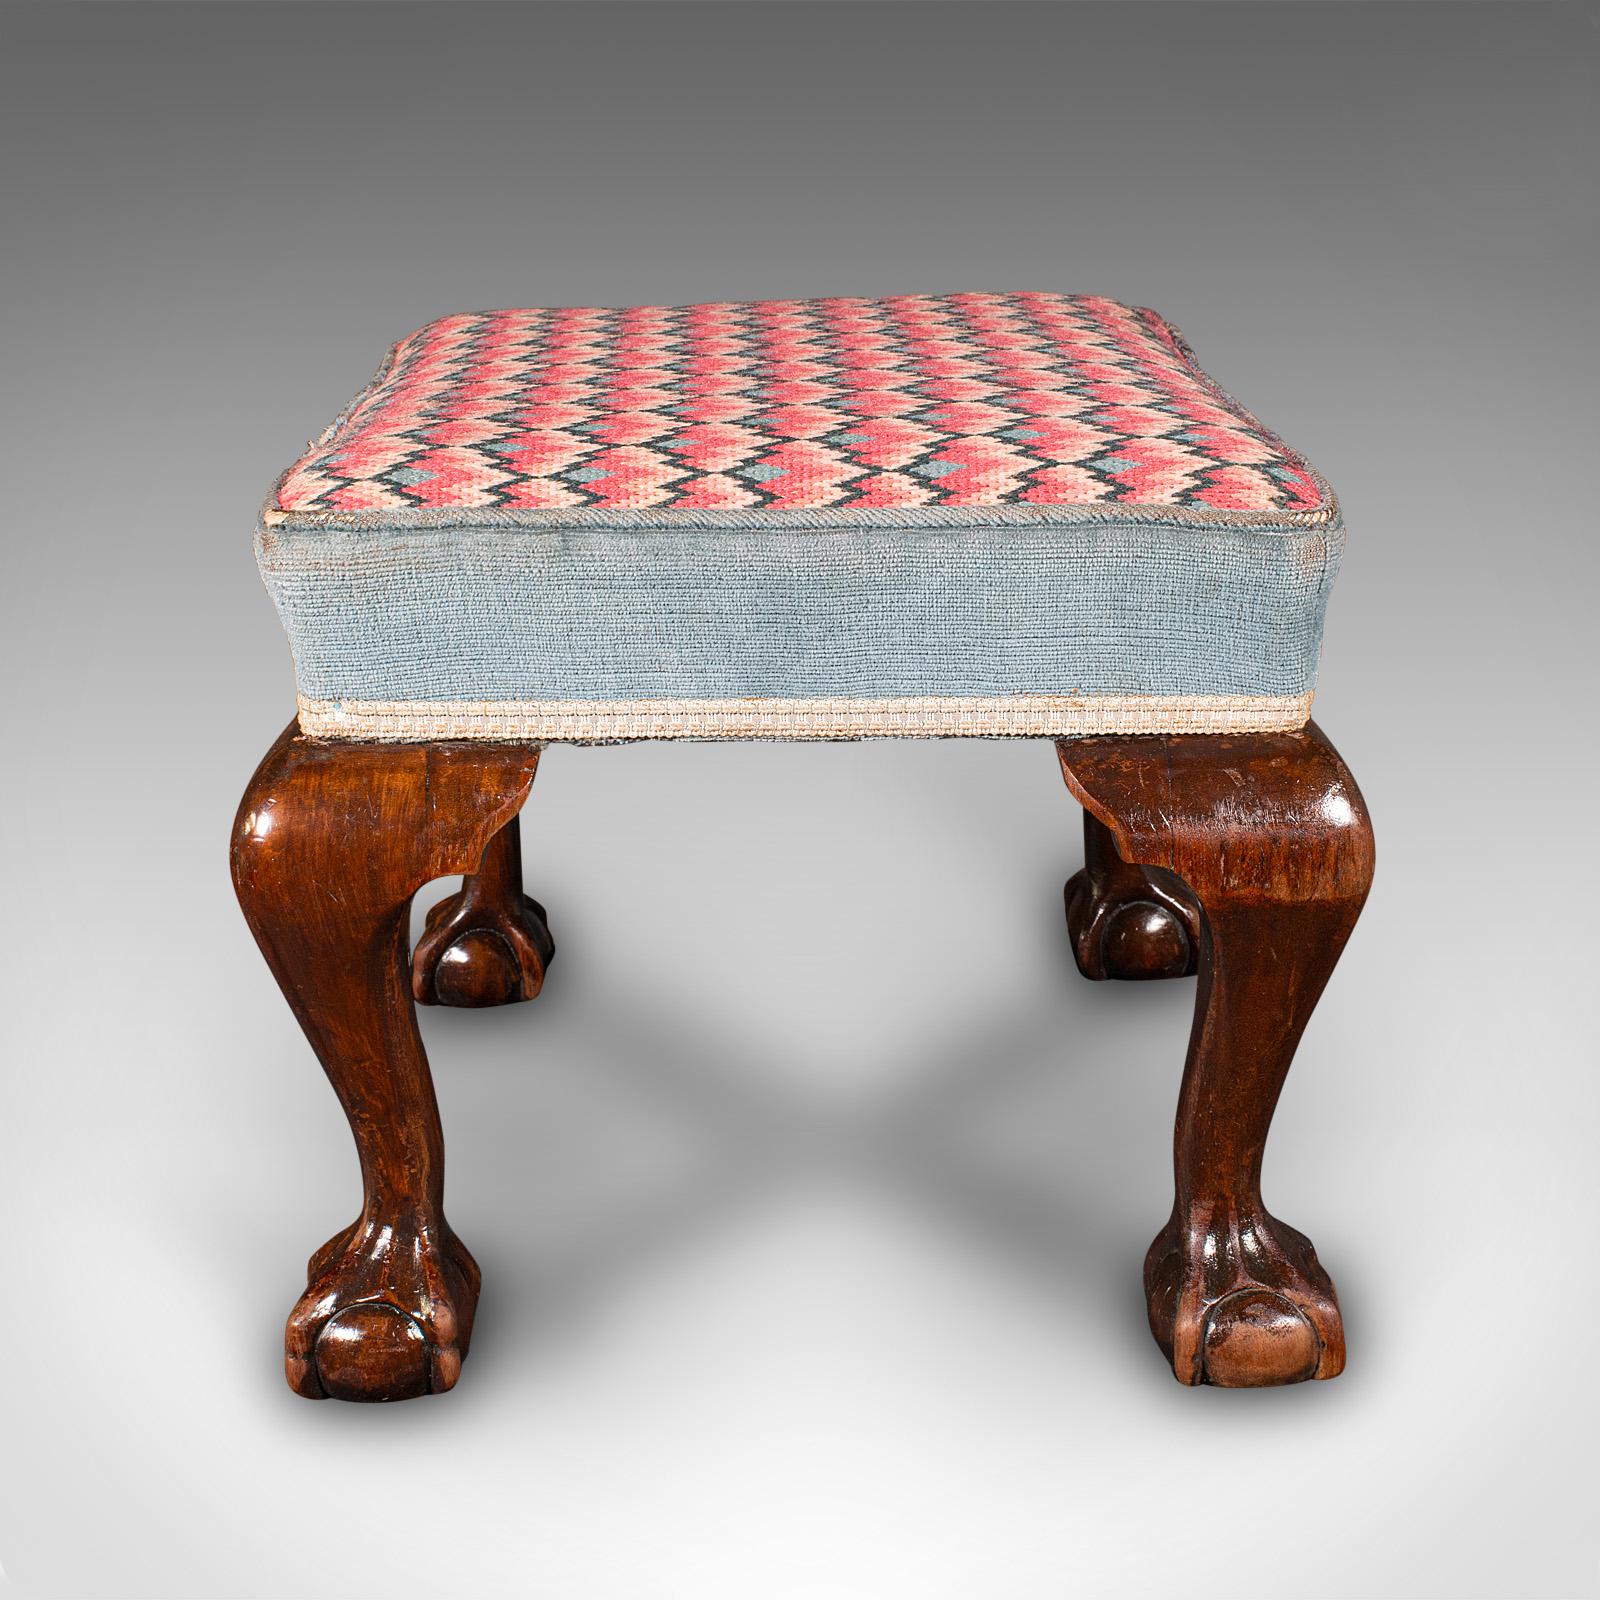 Antique Fireside Stool, English, Needlepoint, Footstool, Early Victorian, C.1850 In Good Condition For Sale In Hele, Devon, GB